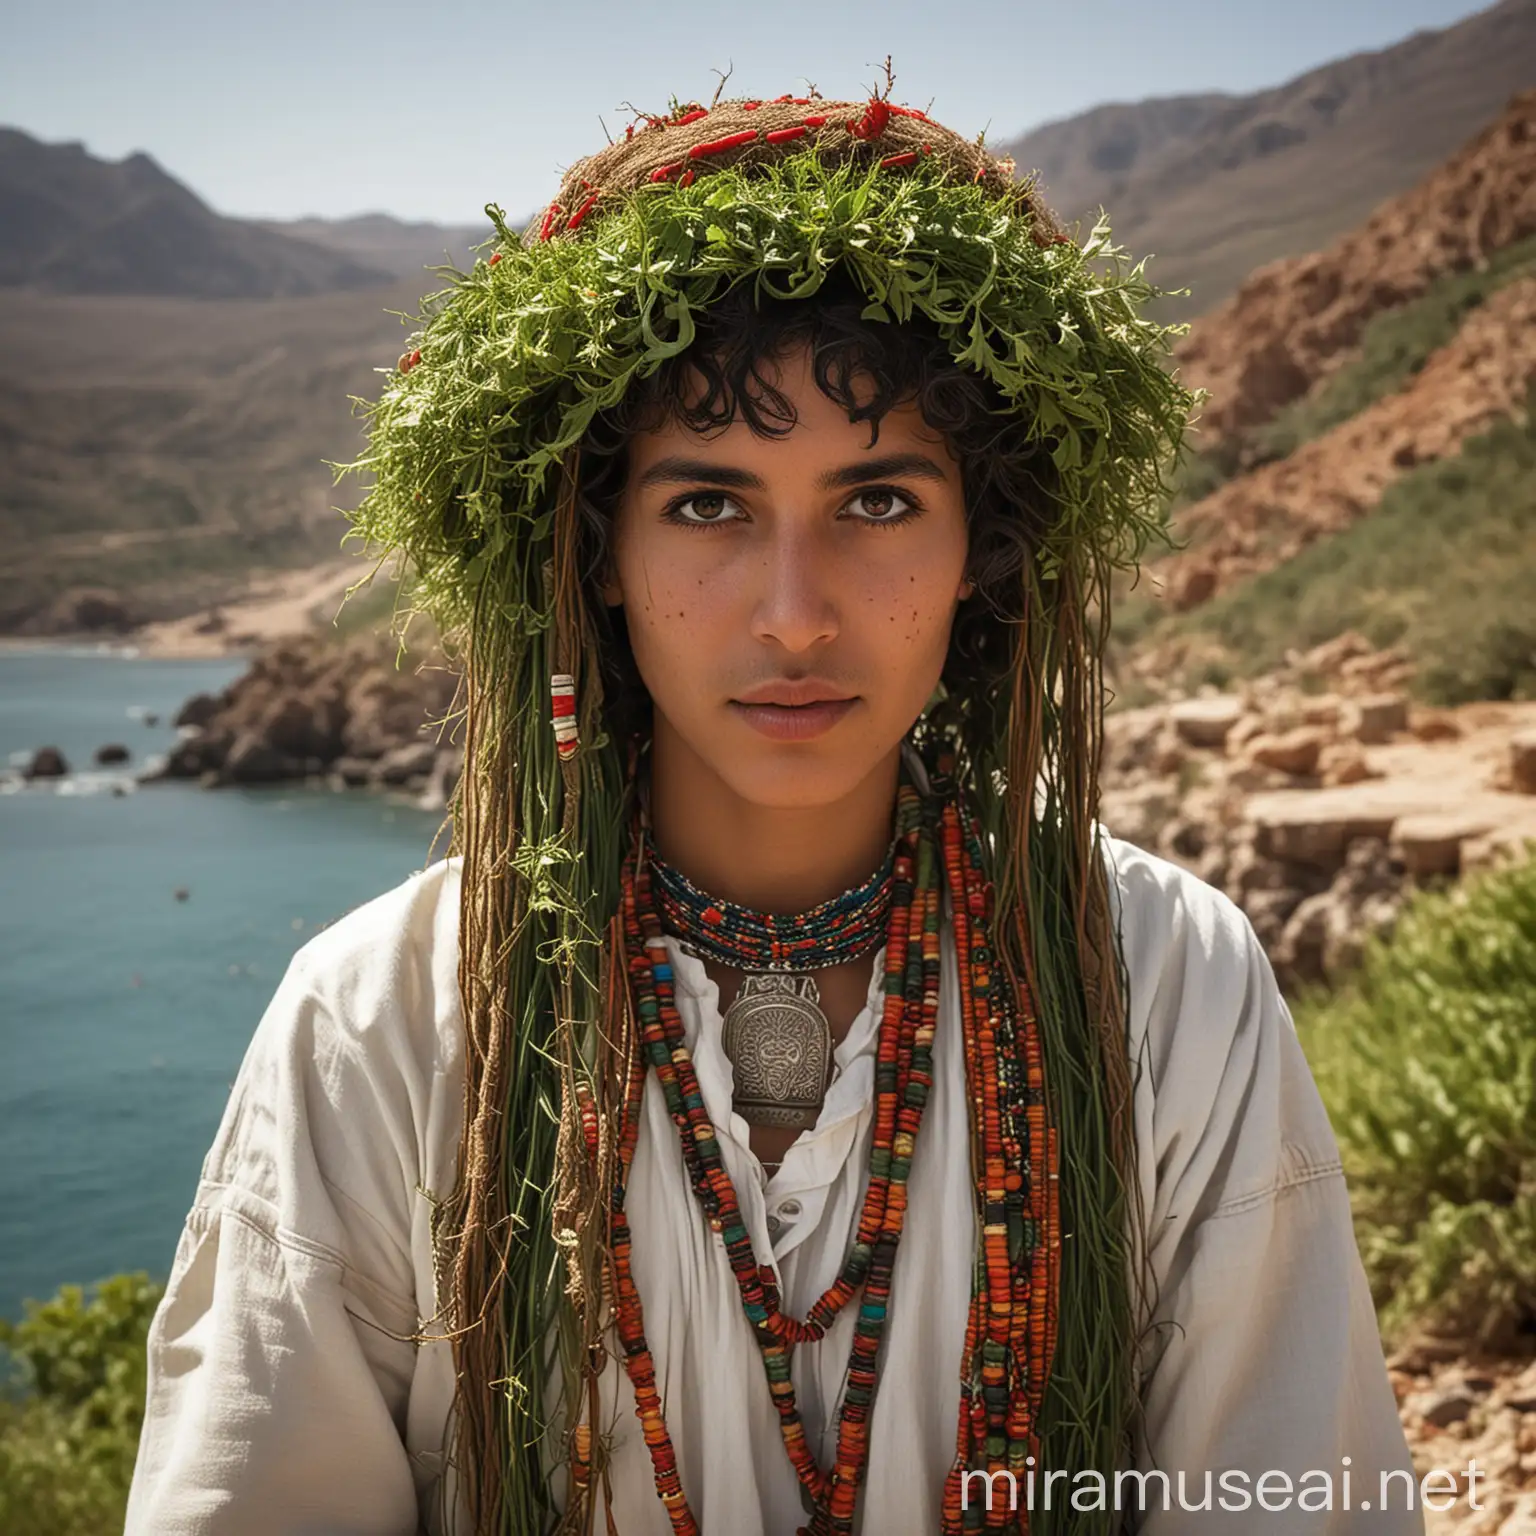 Berber Tribe Amidst Seaside Mountains Traditional Attire and Cultural Identity in Verdant Island Landscape